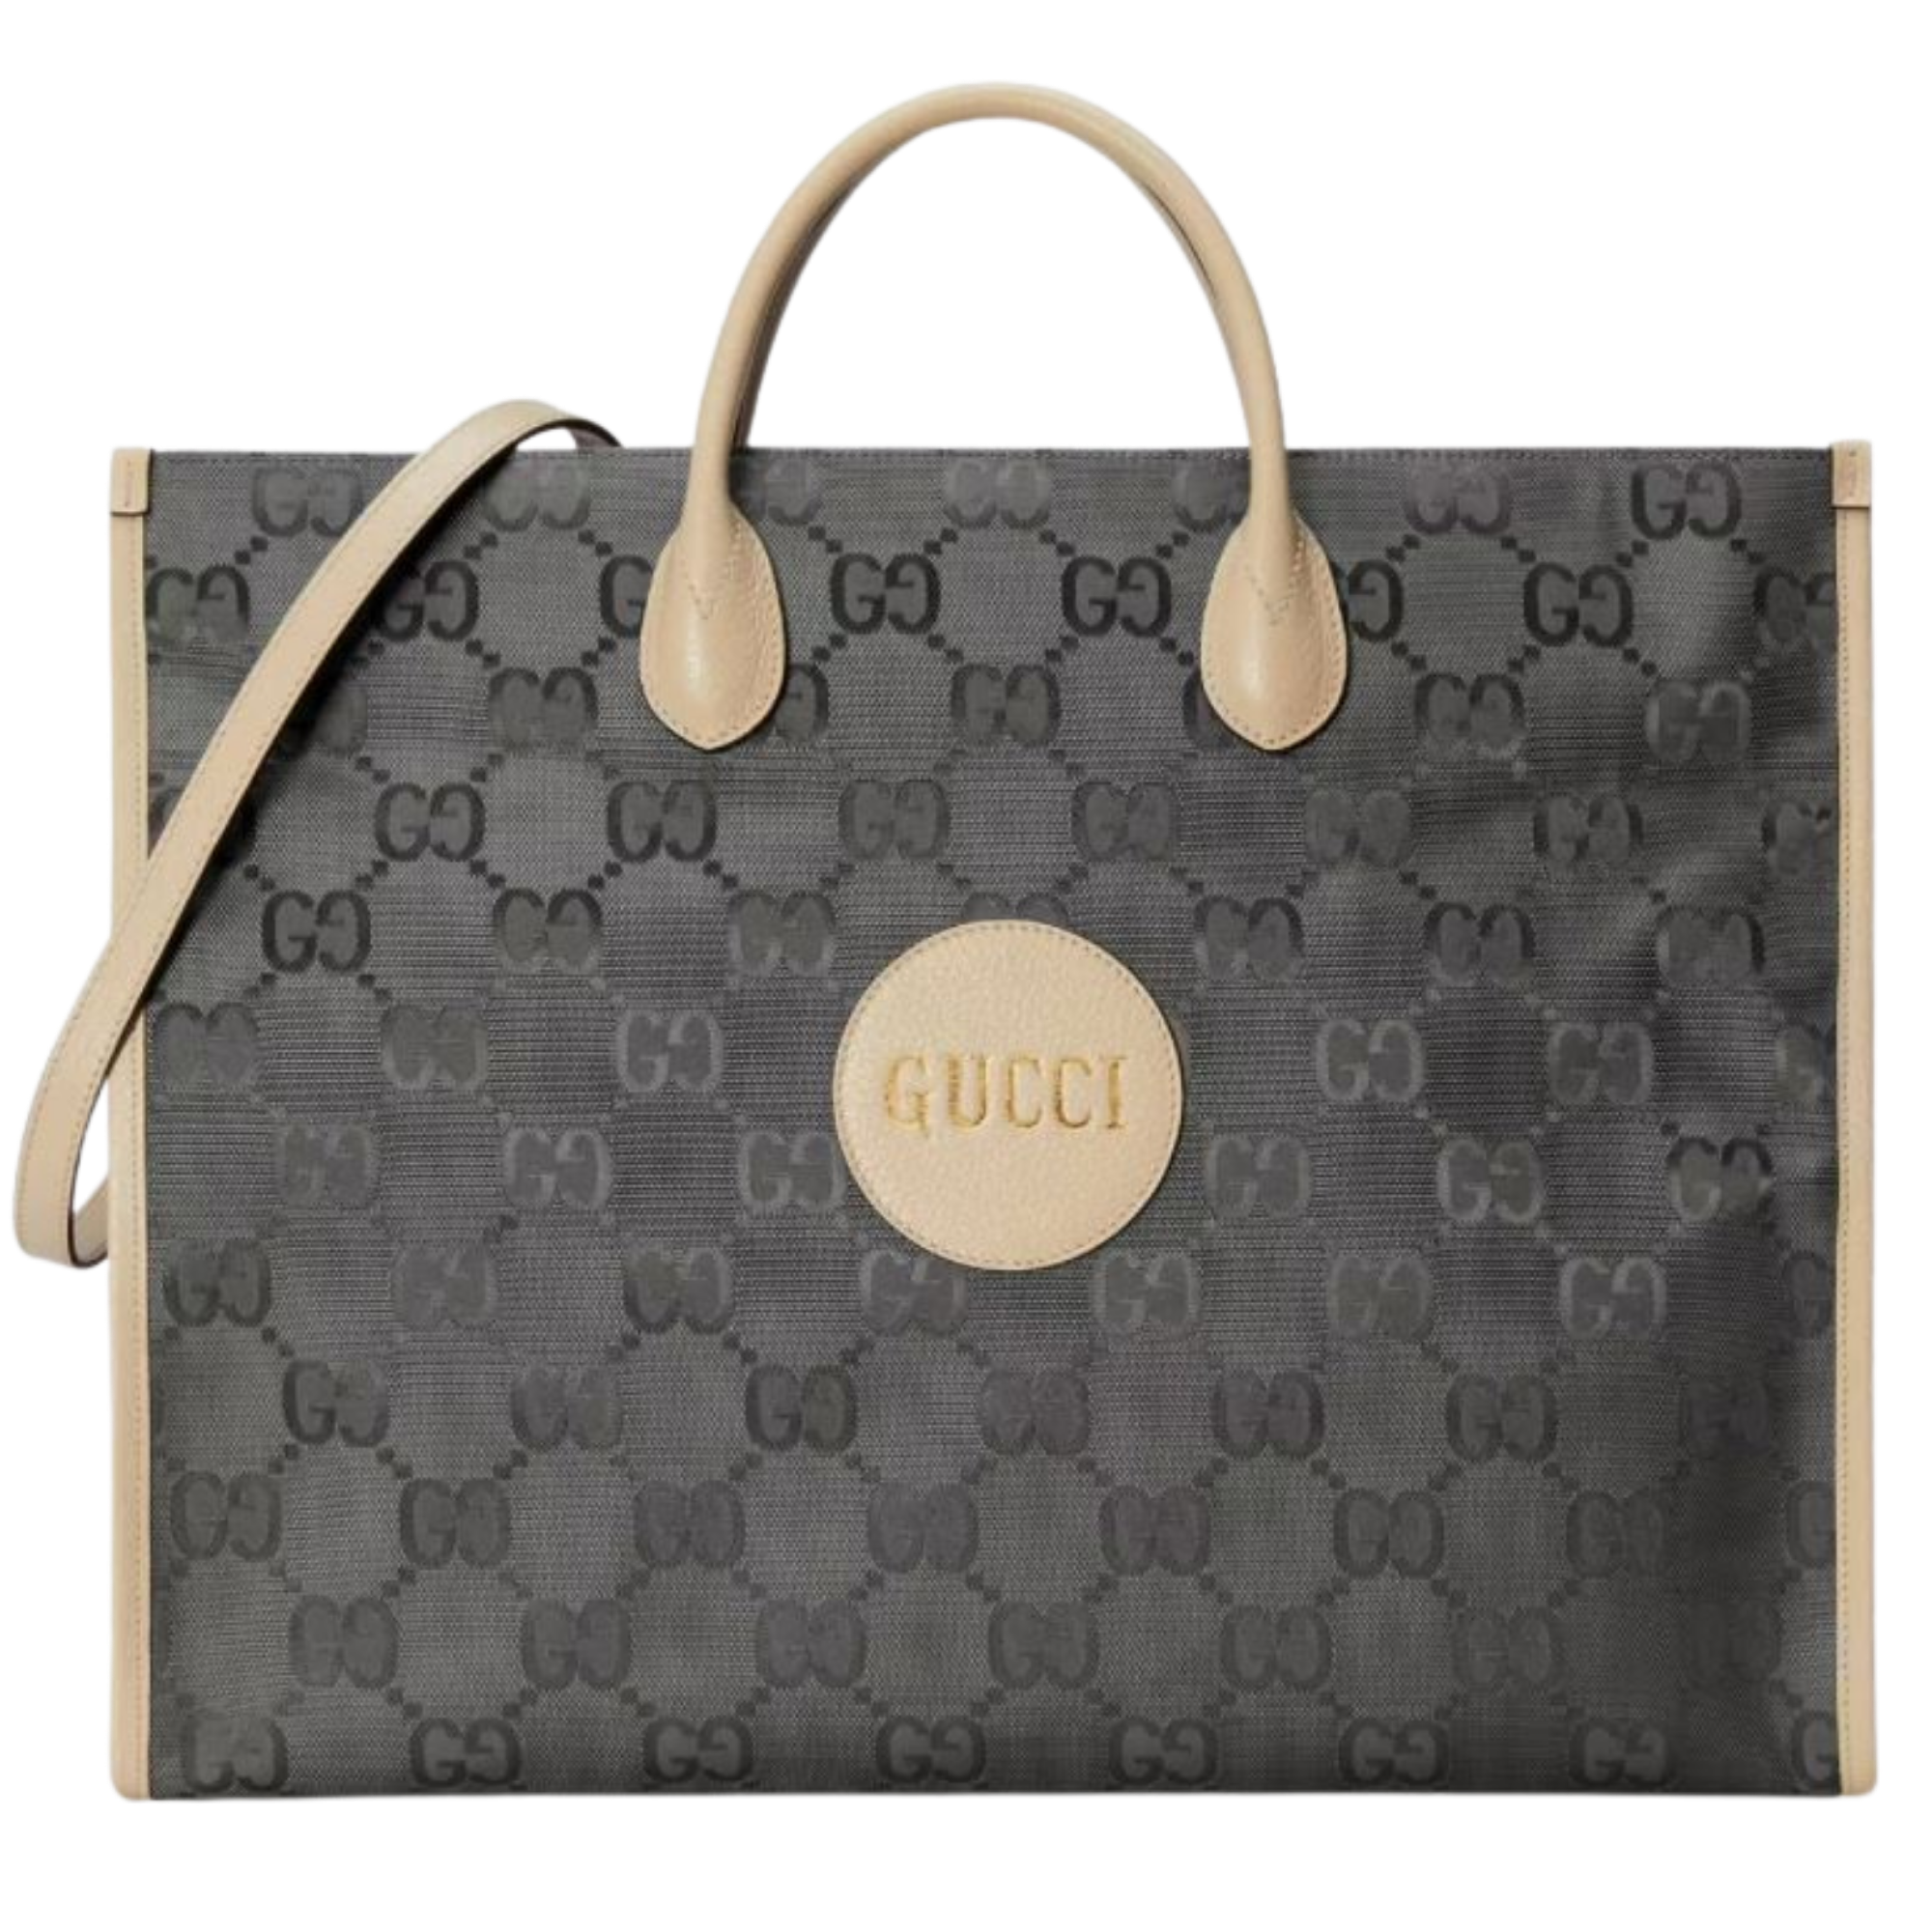 BRAND NEW GENUINE GUCCI HANDBAG**** - clothing & accessories - by owner -  apparel sale - craigslist